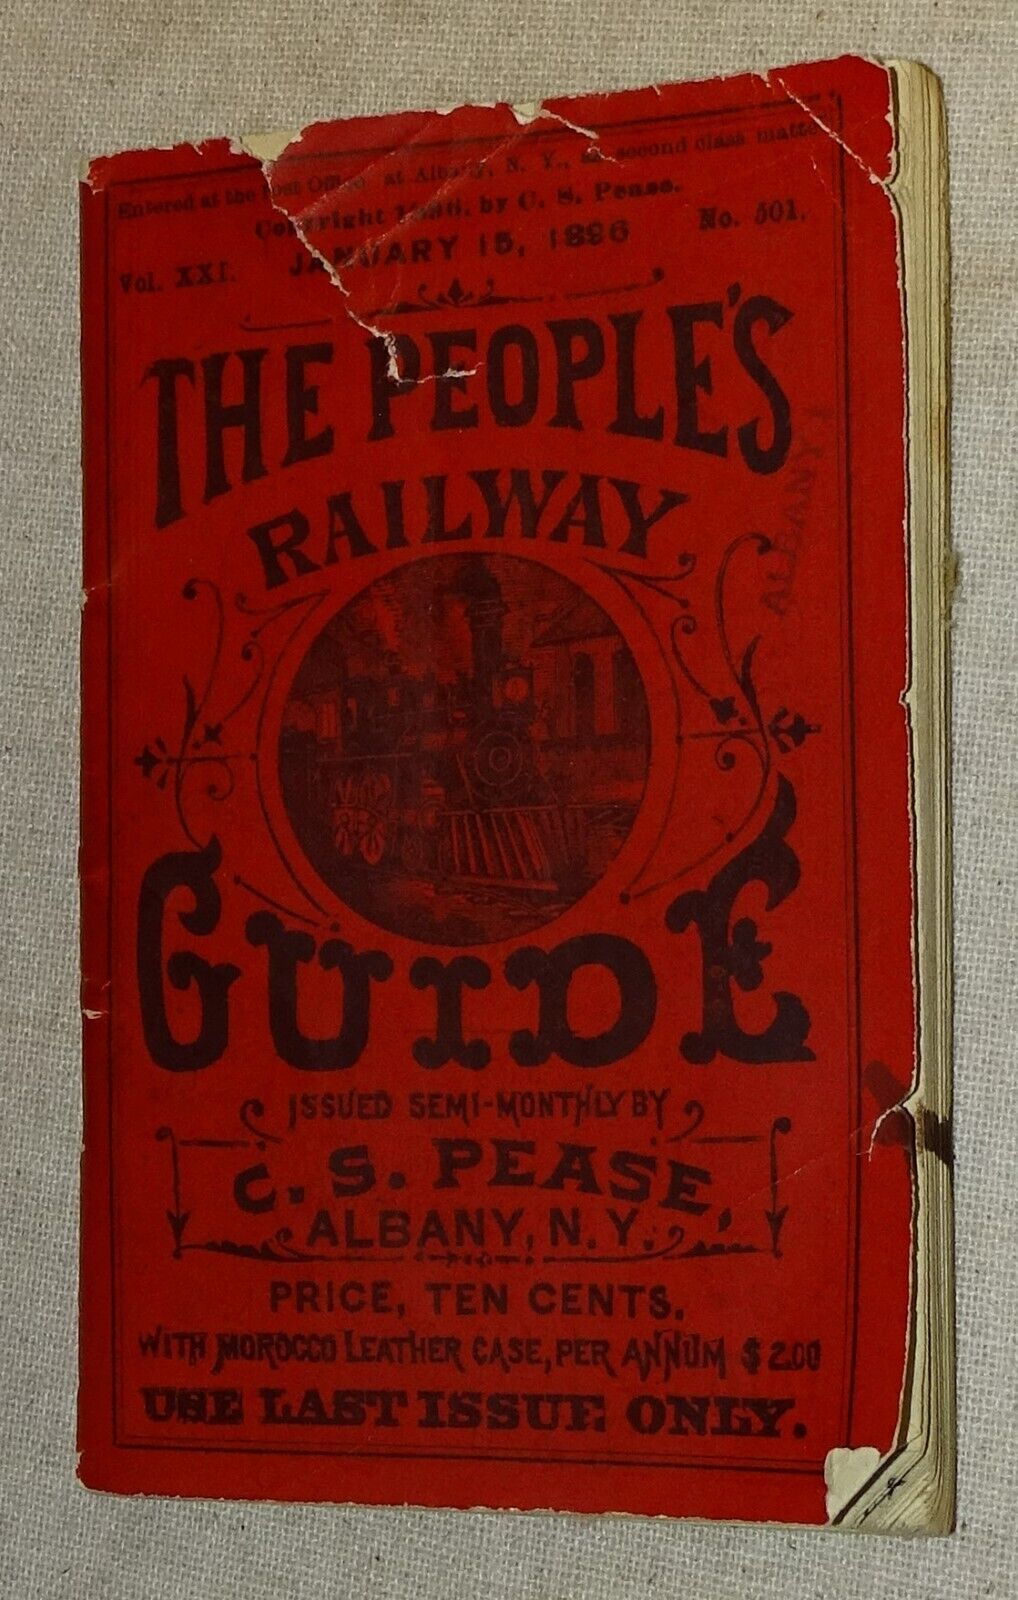 1896 The People's Railway Guide - C.S. Pease Albany NY